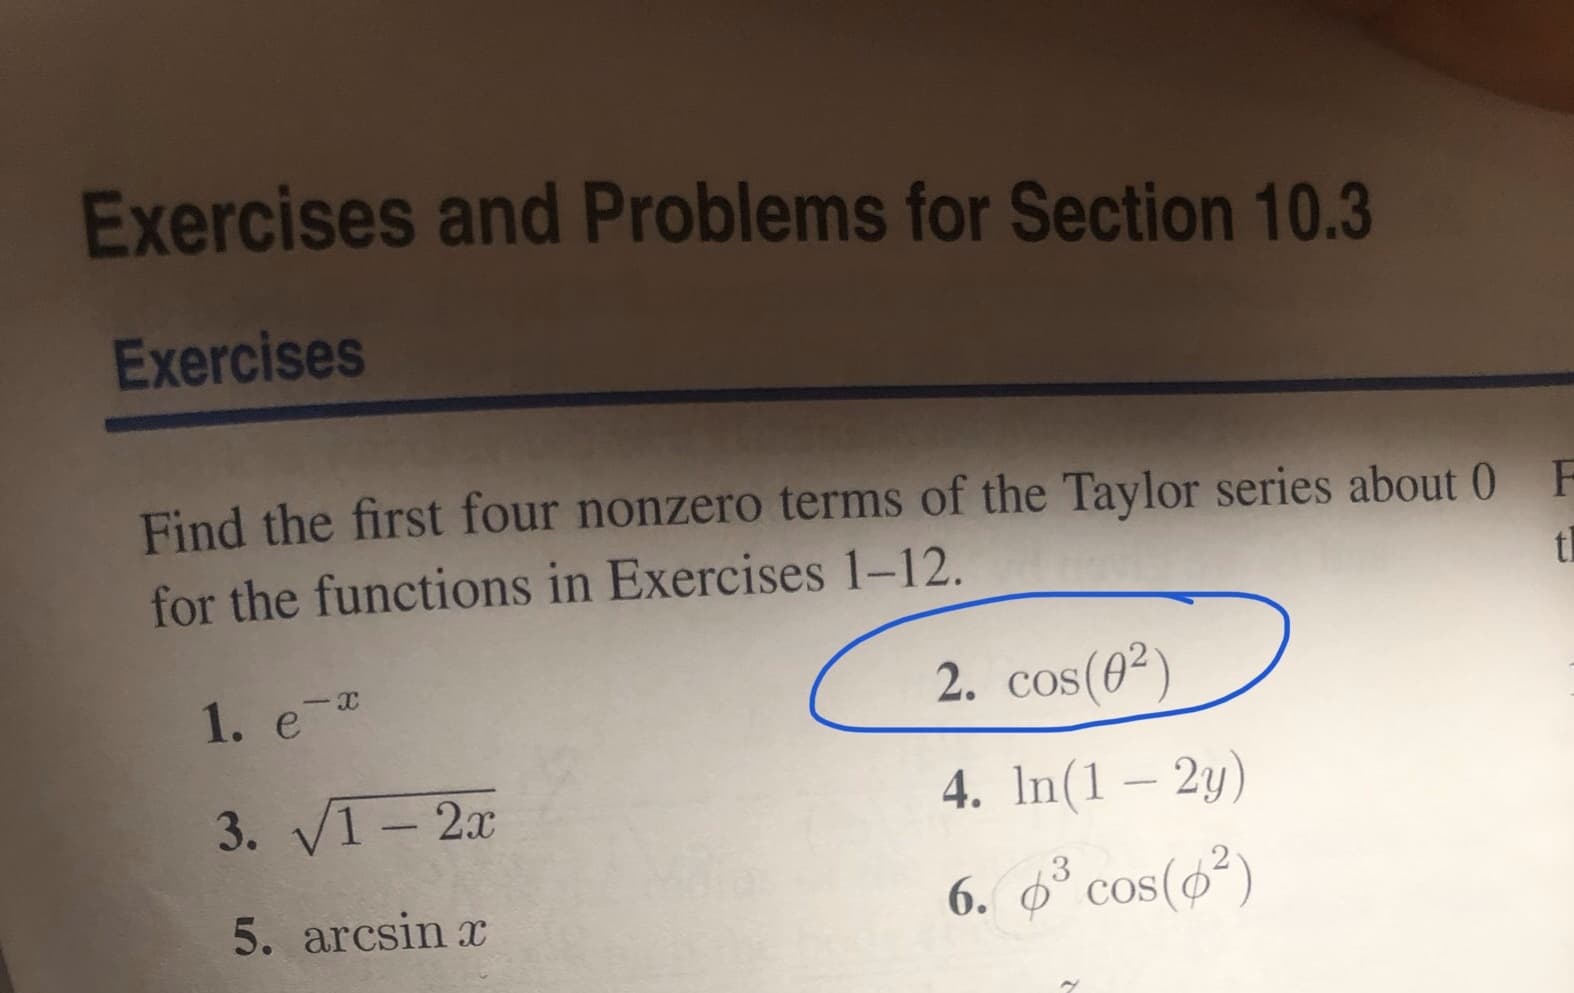 Exercises and Problems for Section 10.3
Exercises
Find the first four nonzero terms of the Taylor series about 0 F
for the functions in Exercises 1-12.
th
1. e-
2. cos(0²)
3. VI-2x
4. In(1 – 2y)
5. arcsin x
6. 6* cos(6²)
